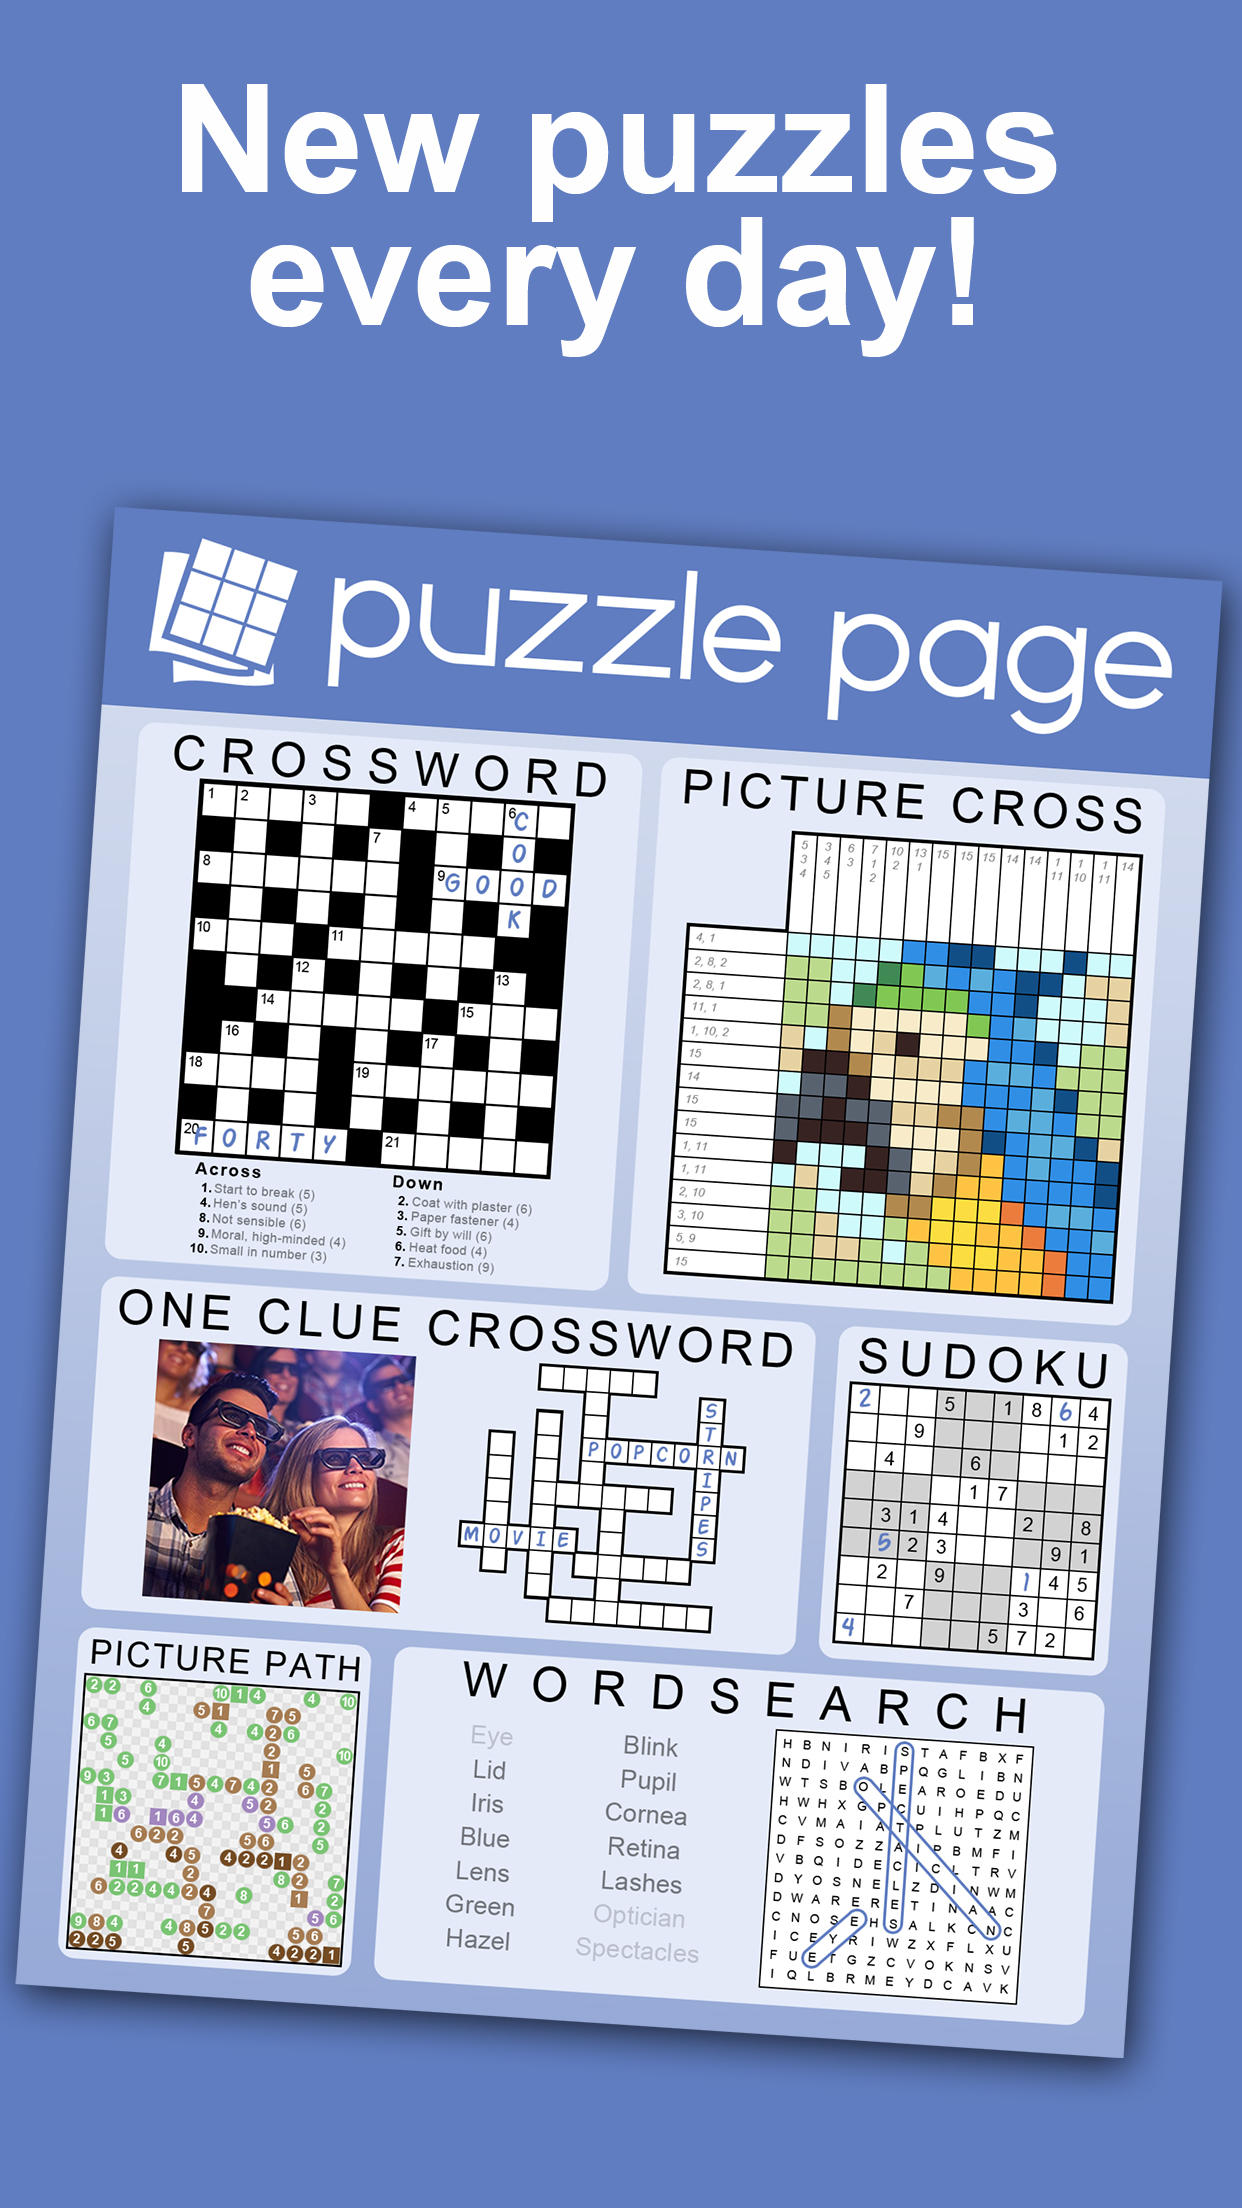 Puzzle Page - Daily Puzzles!のキャプチャ